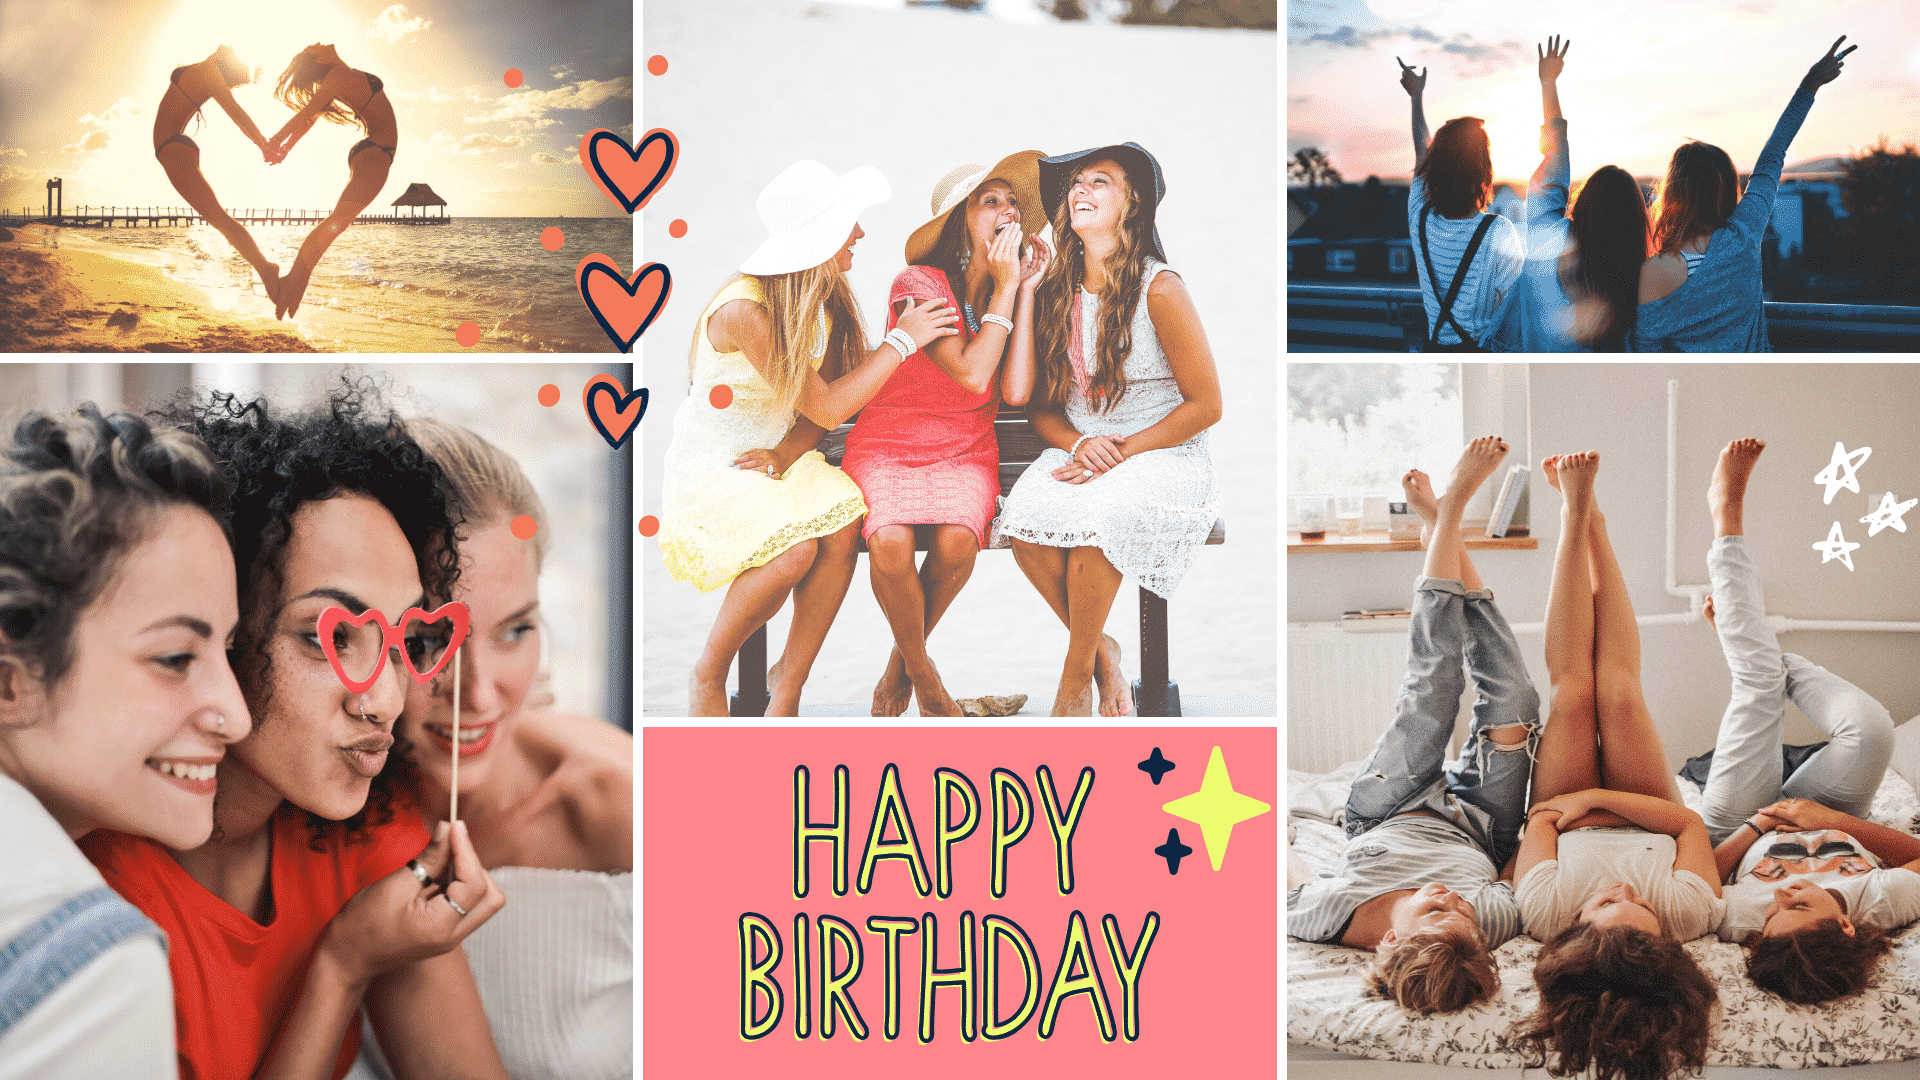 How to Make an Amazing Birthday Photo Collage for Your Awesome Friend Healthy Voyager